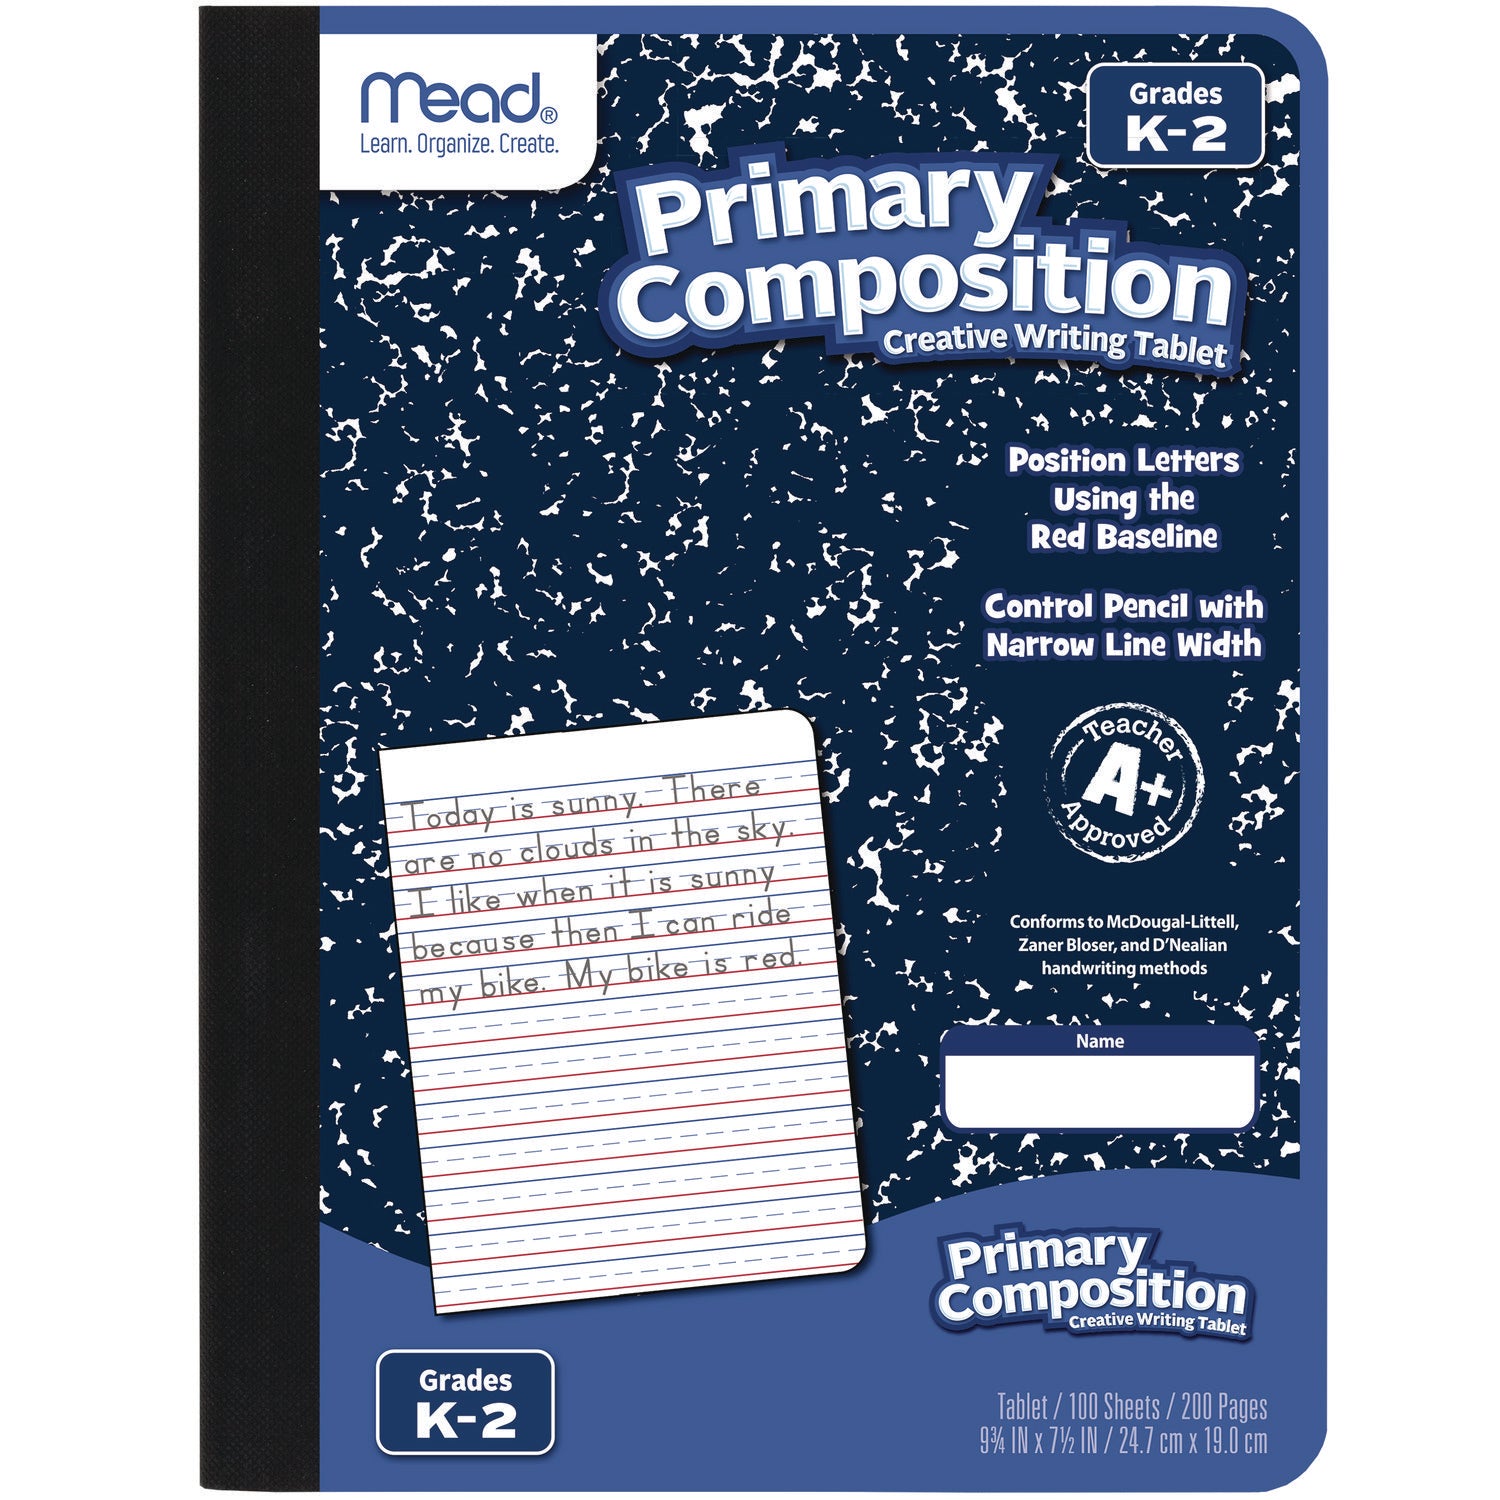 Primary Composition Book, Manuscript Format, Blue/White Cover, (100) 9.75 x 7.5 Sheets - 1